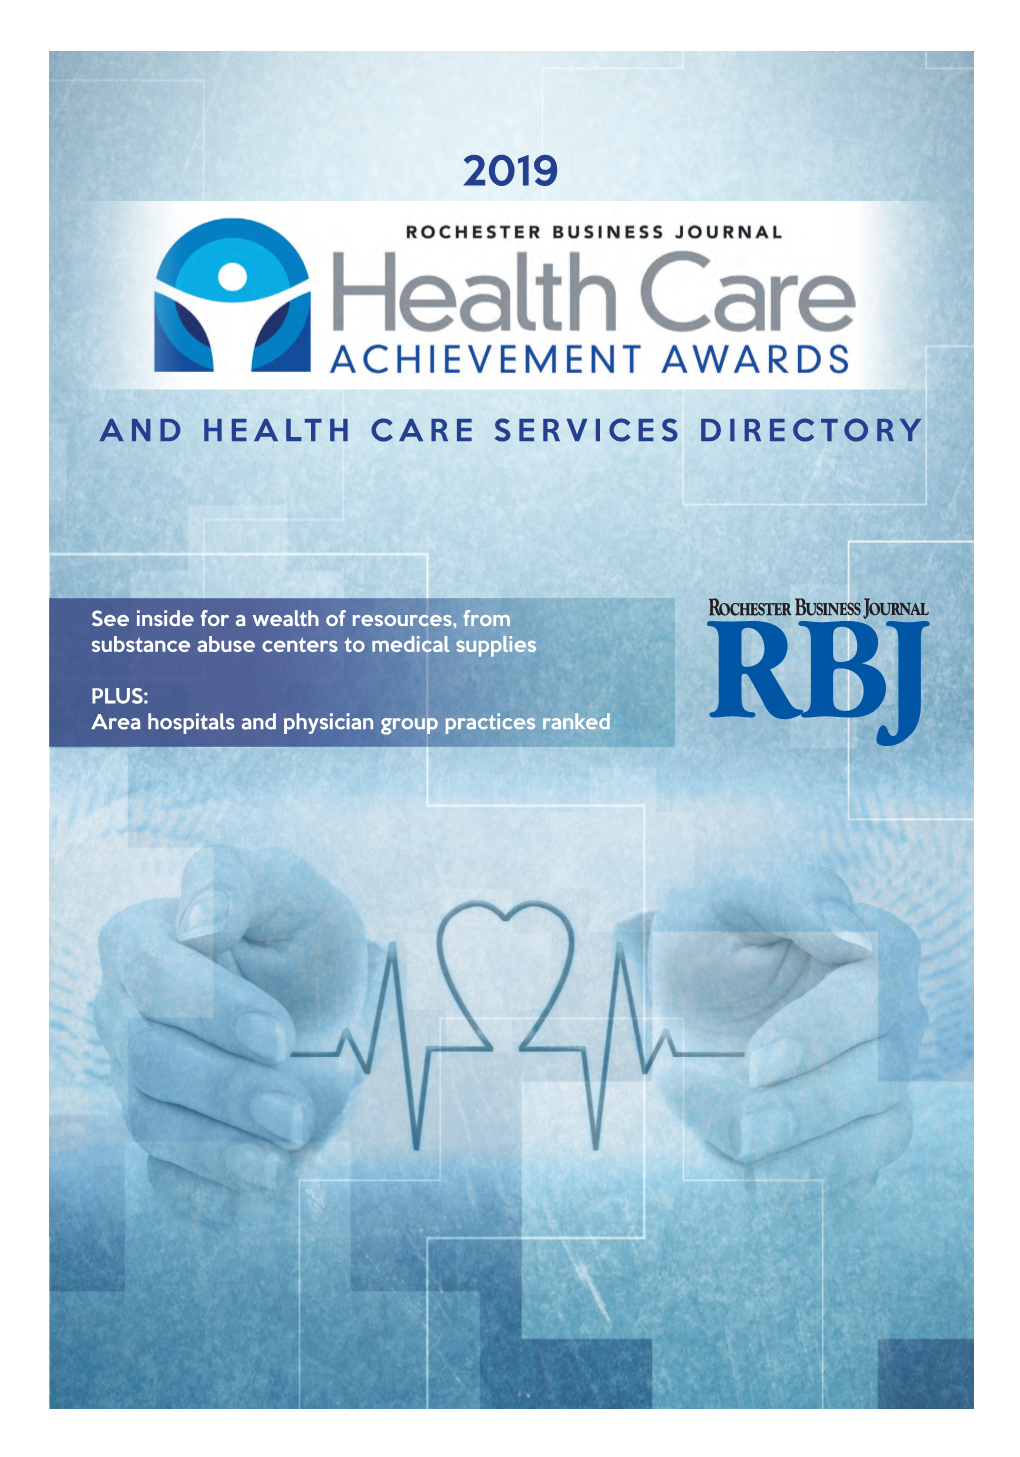 And Health Care Services Directory